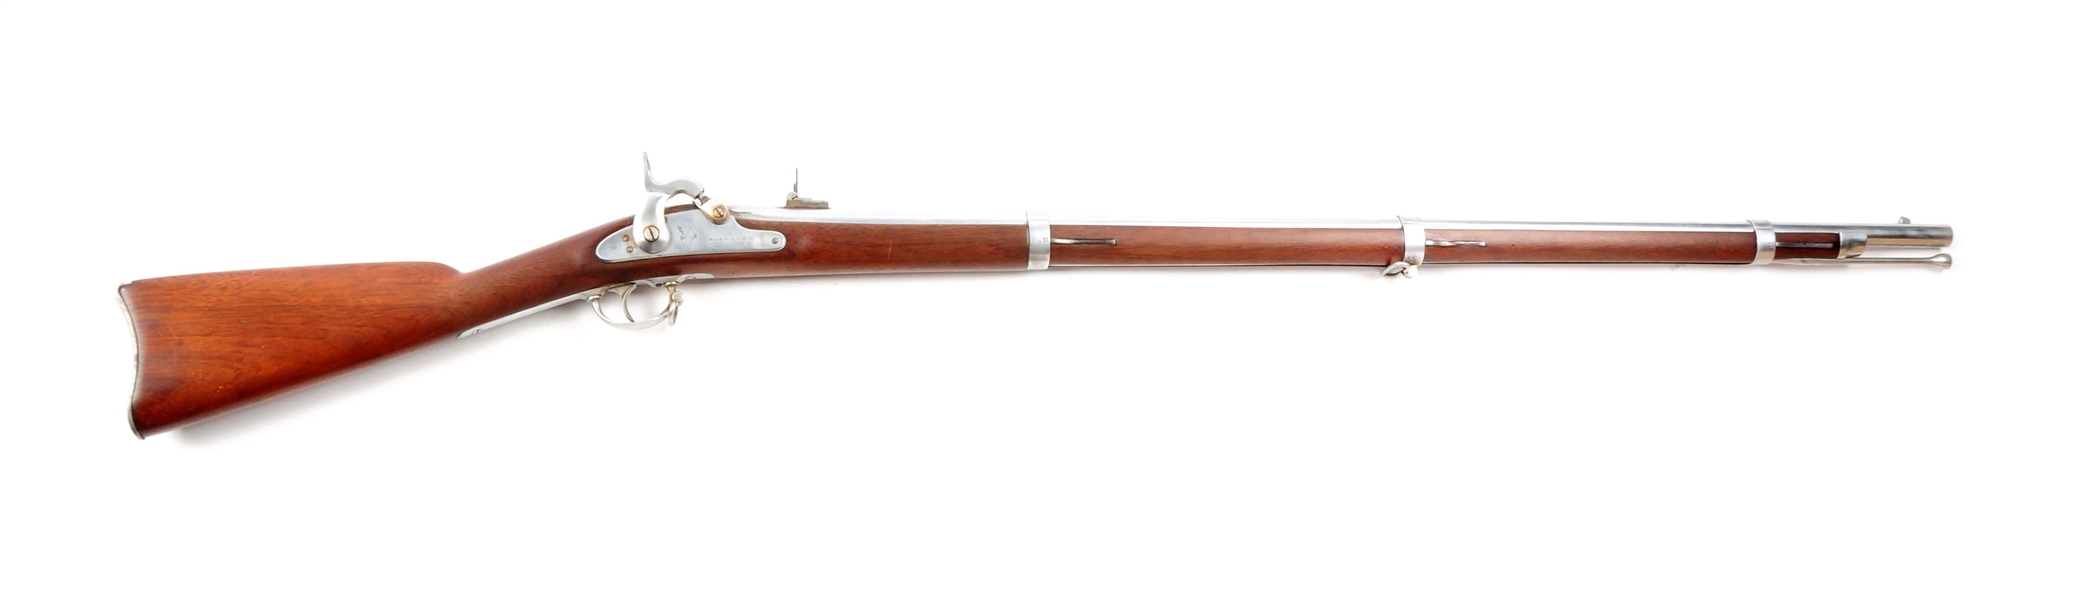 (A)	U.S. MODEL 1861 SAVAGE PERCUSSION RIFLE-MUSKET WITH NEW JERSEY MARKINGS. 